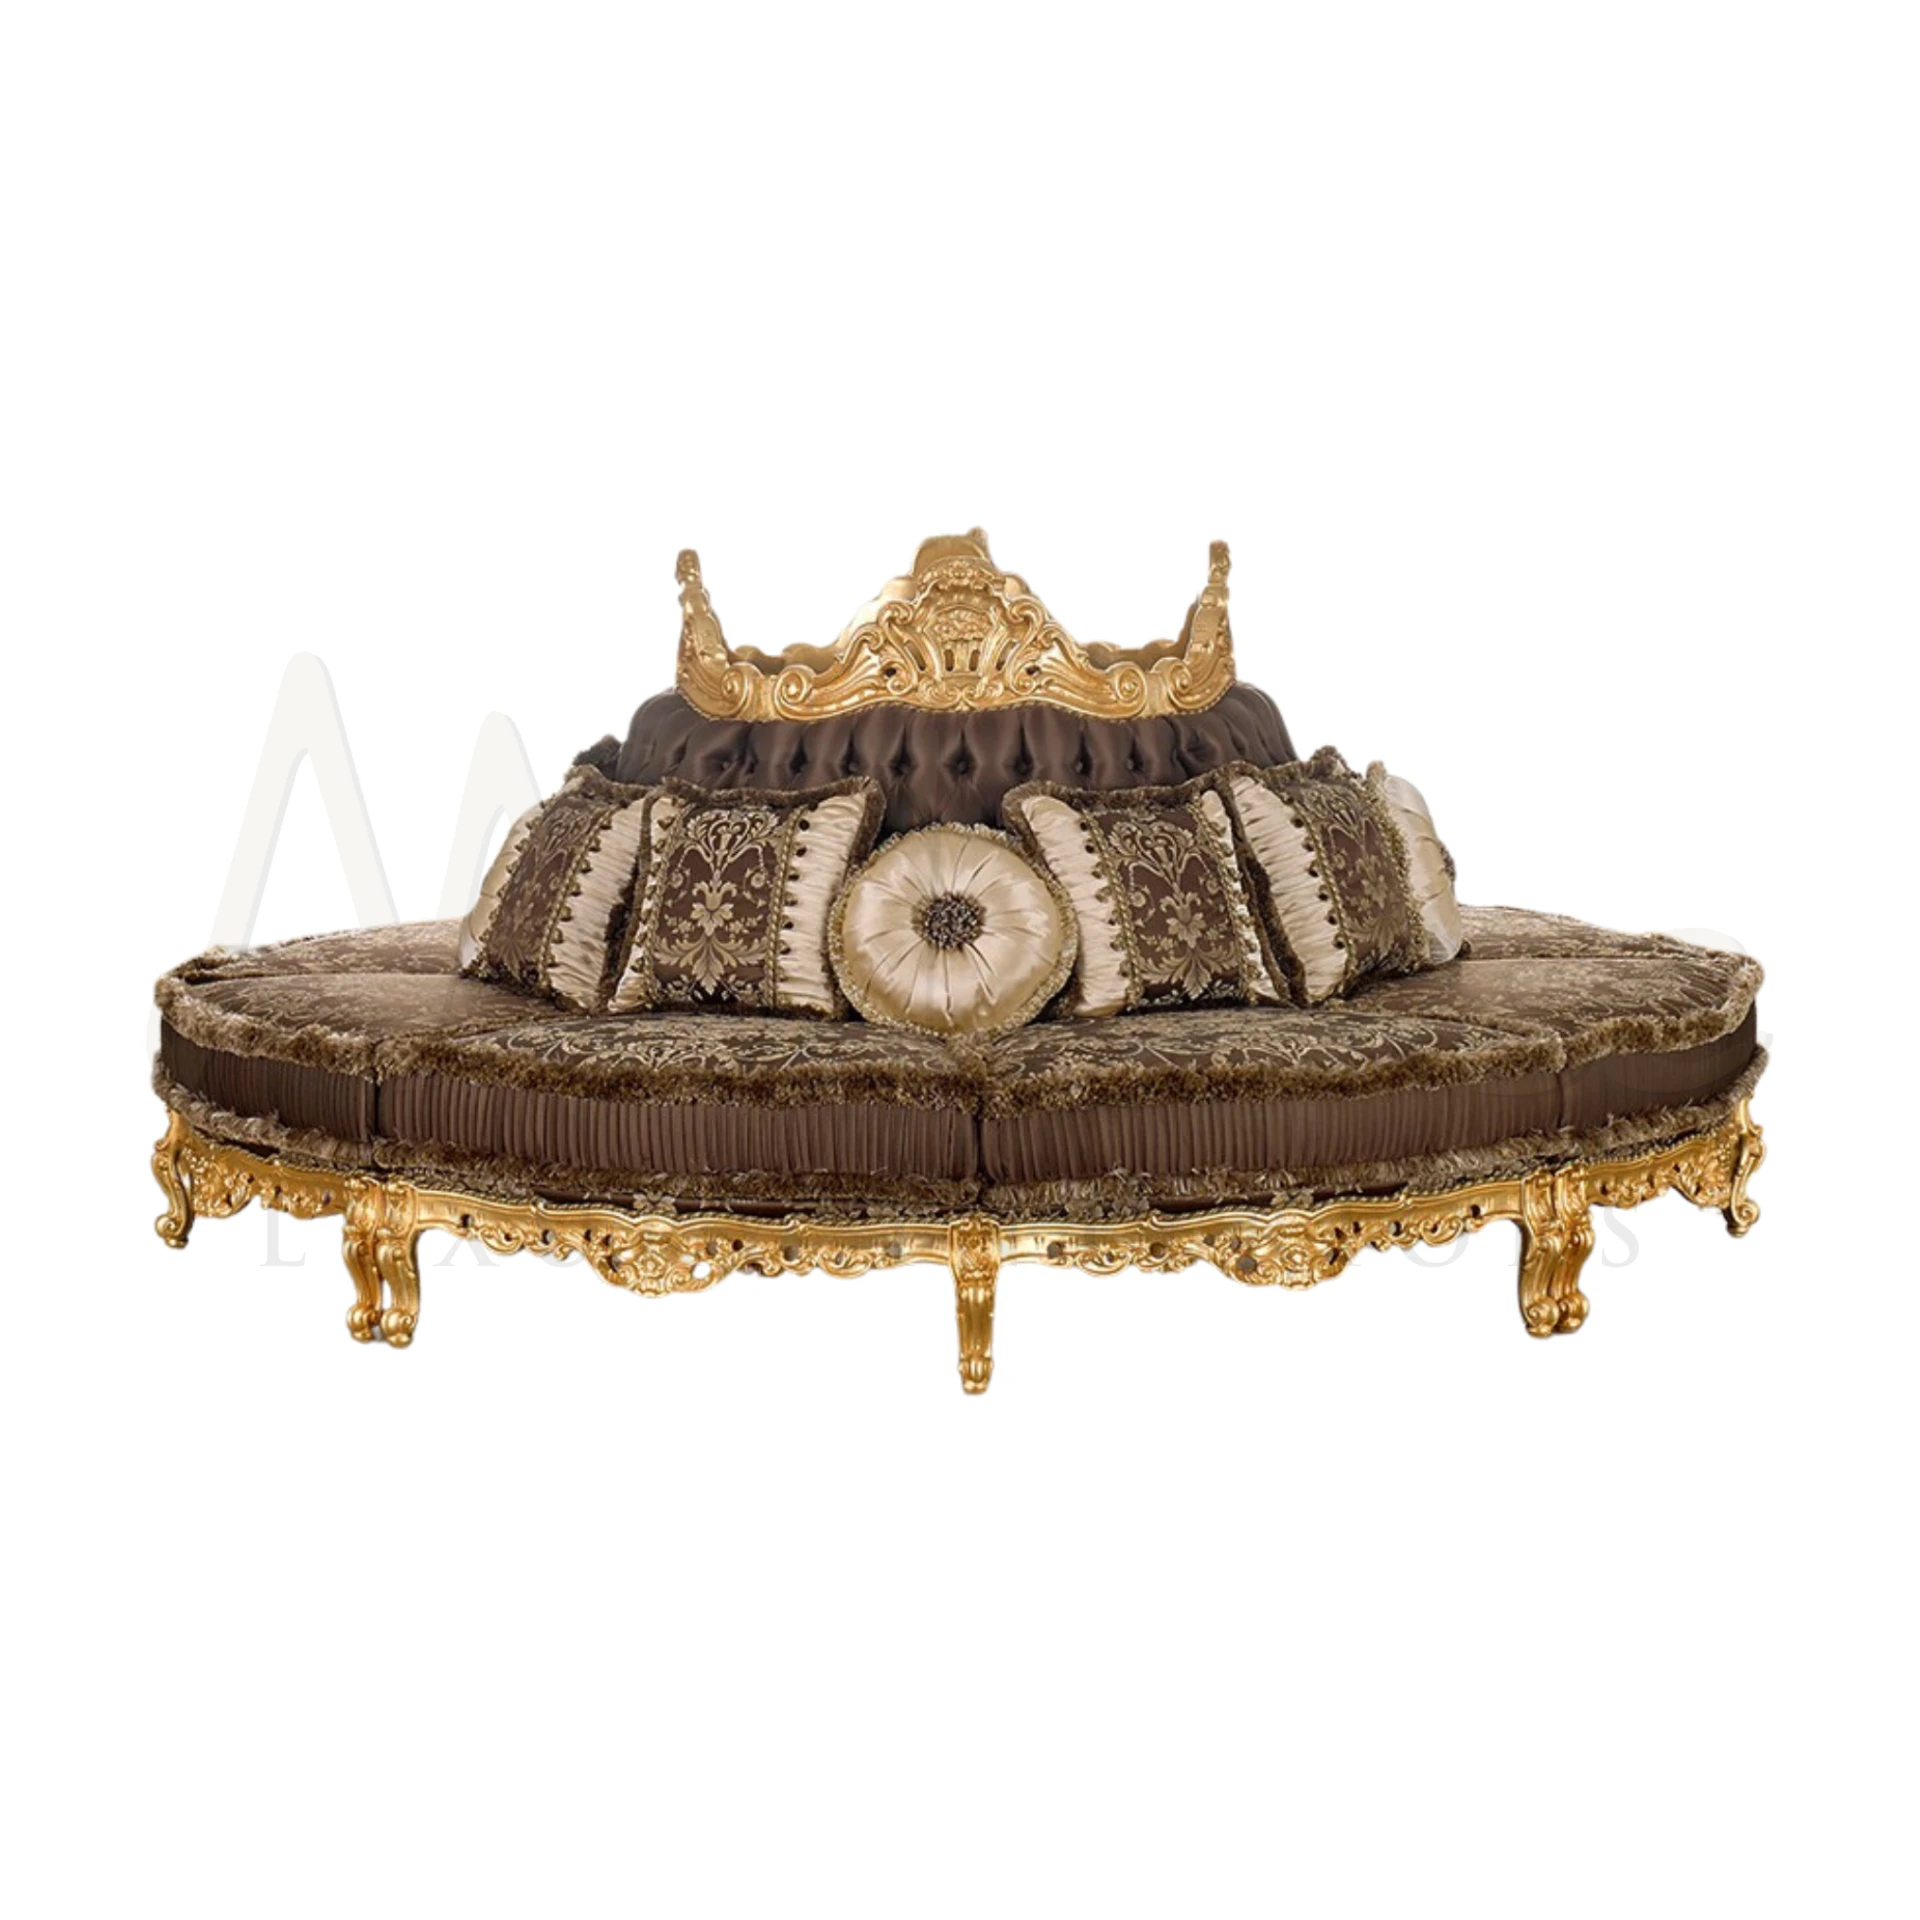 Elegant Victorian Round Sofa with gold leaf finishing, embodying opulent signature style for luxury home interiors.